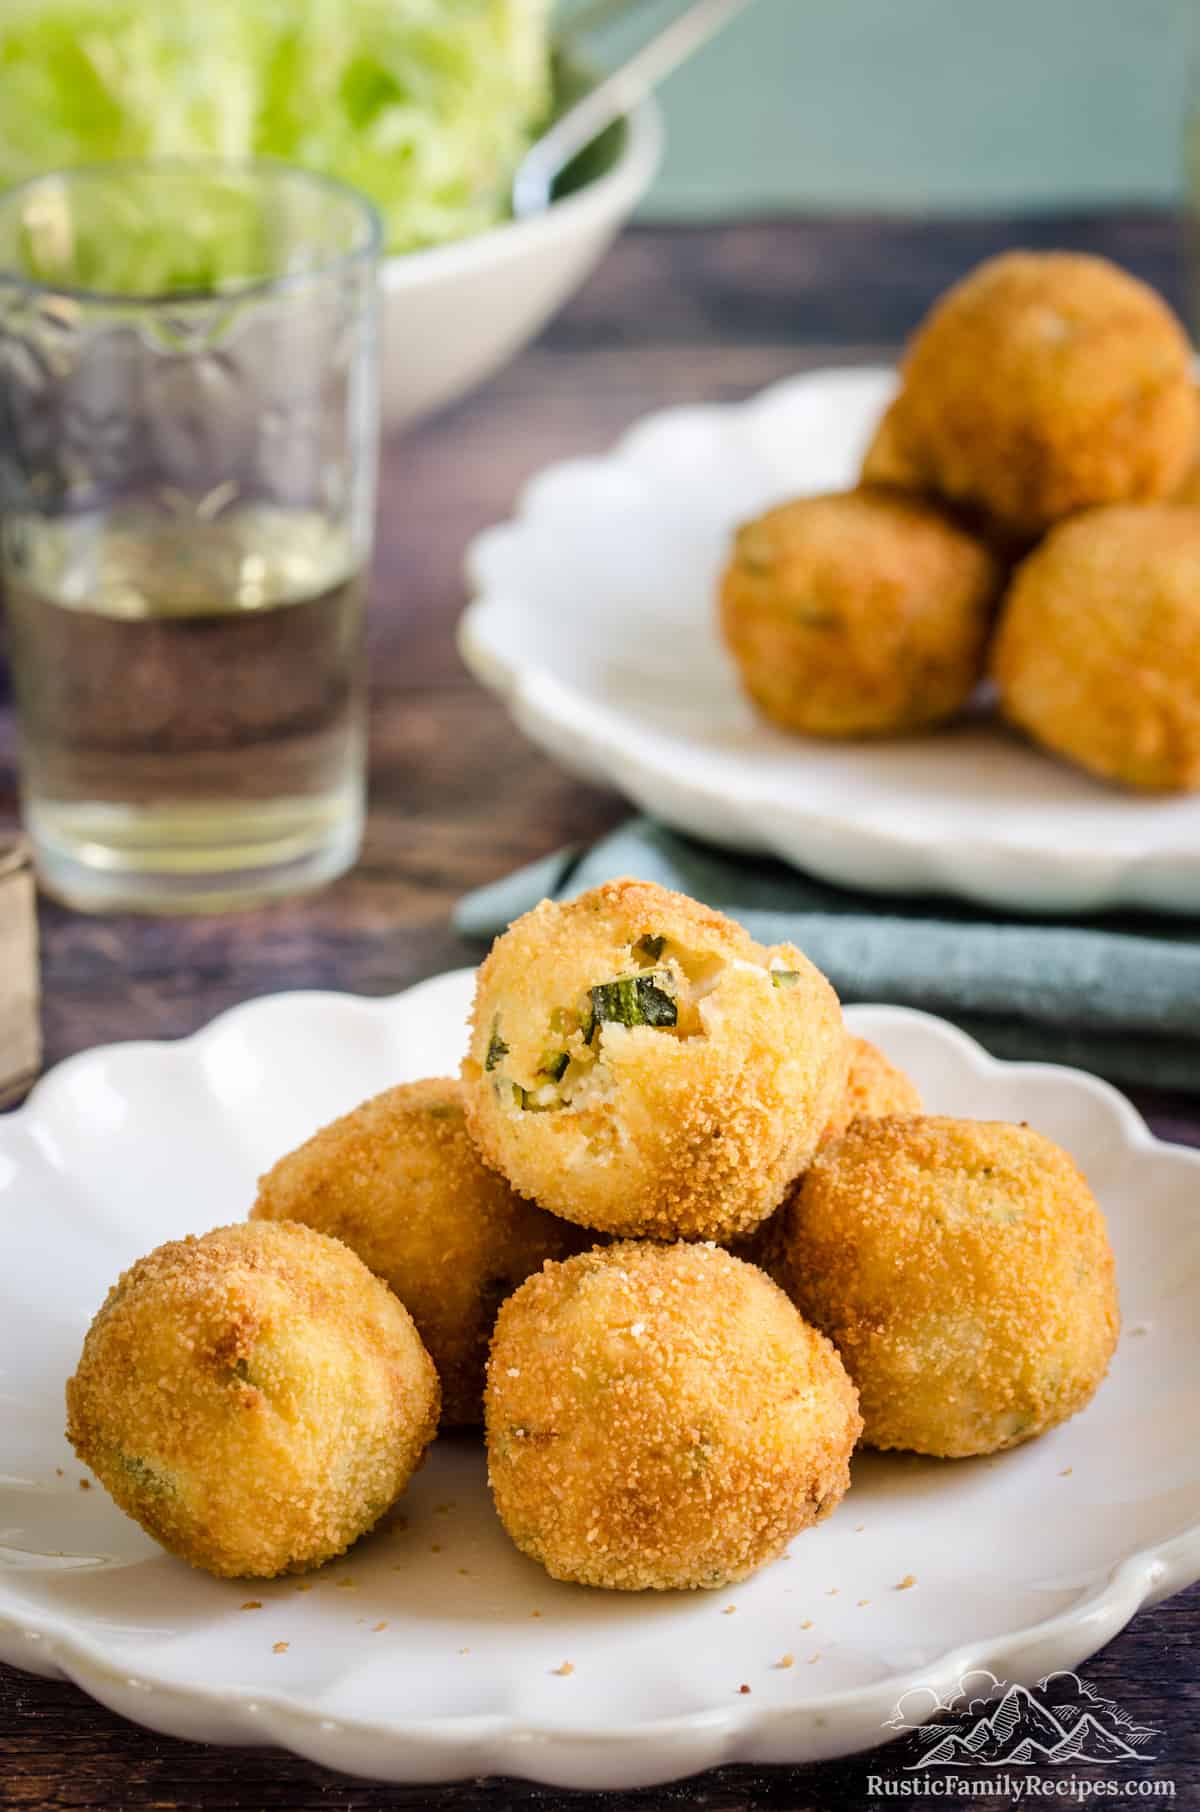 A pile of golden fried arancini with zucchini and goat cheese on a white plate, with a green salad and more arancini in the background.